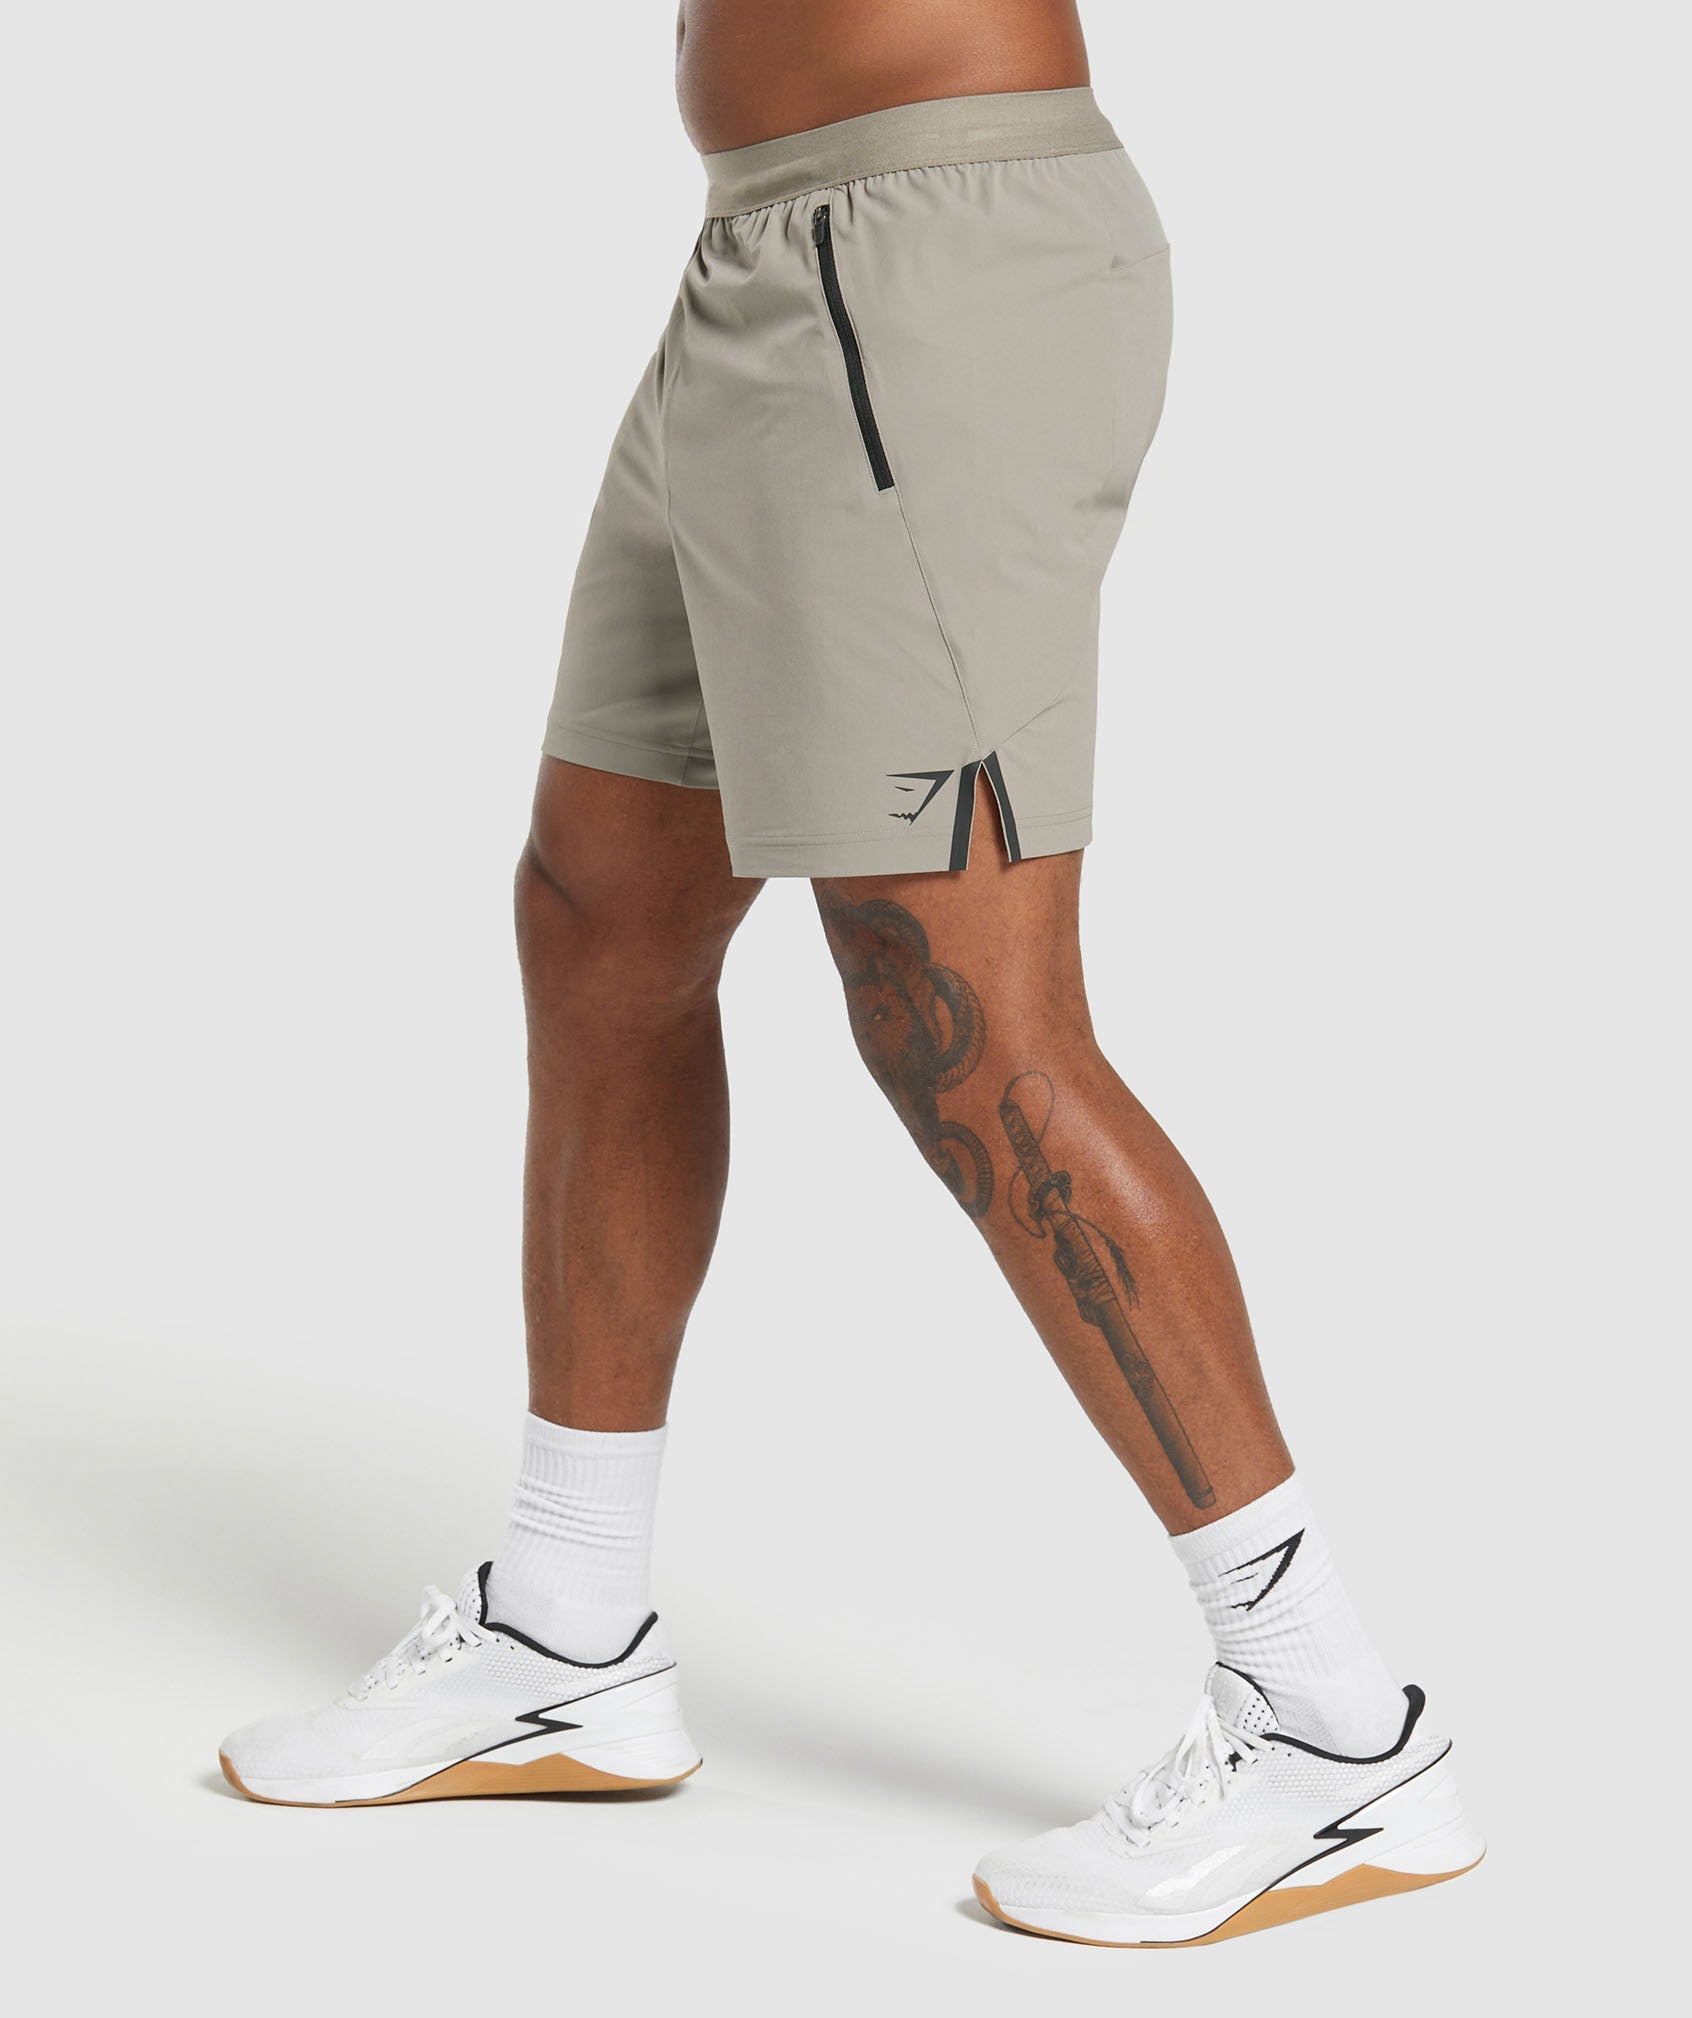 Apex 7" Hybrid Shorts in Linen Brown - view 3